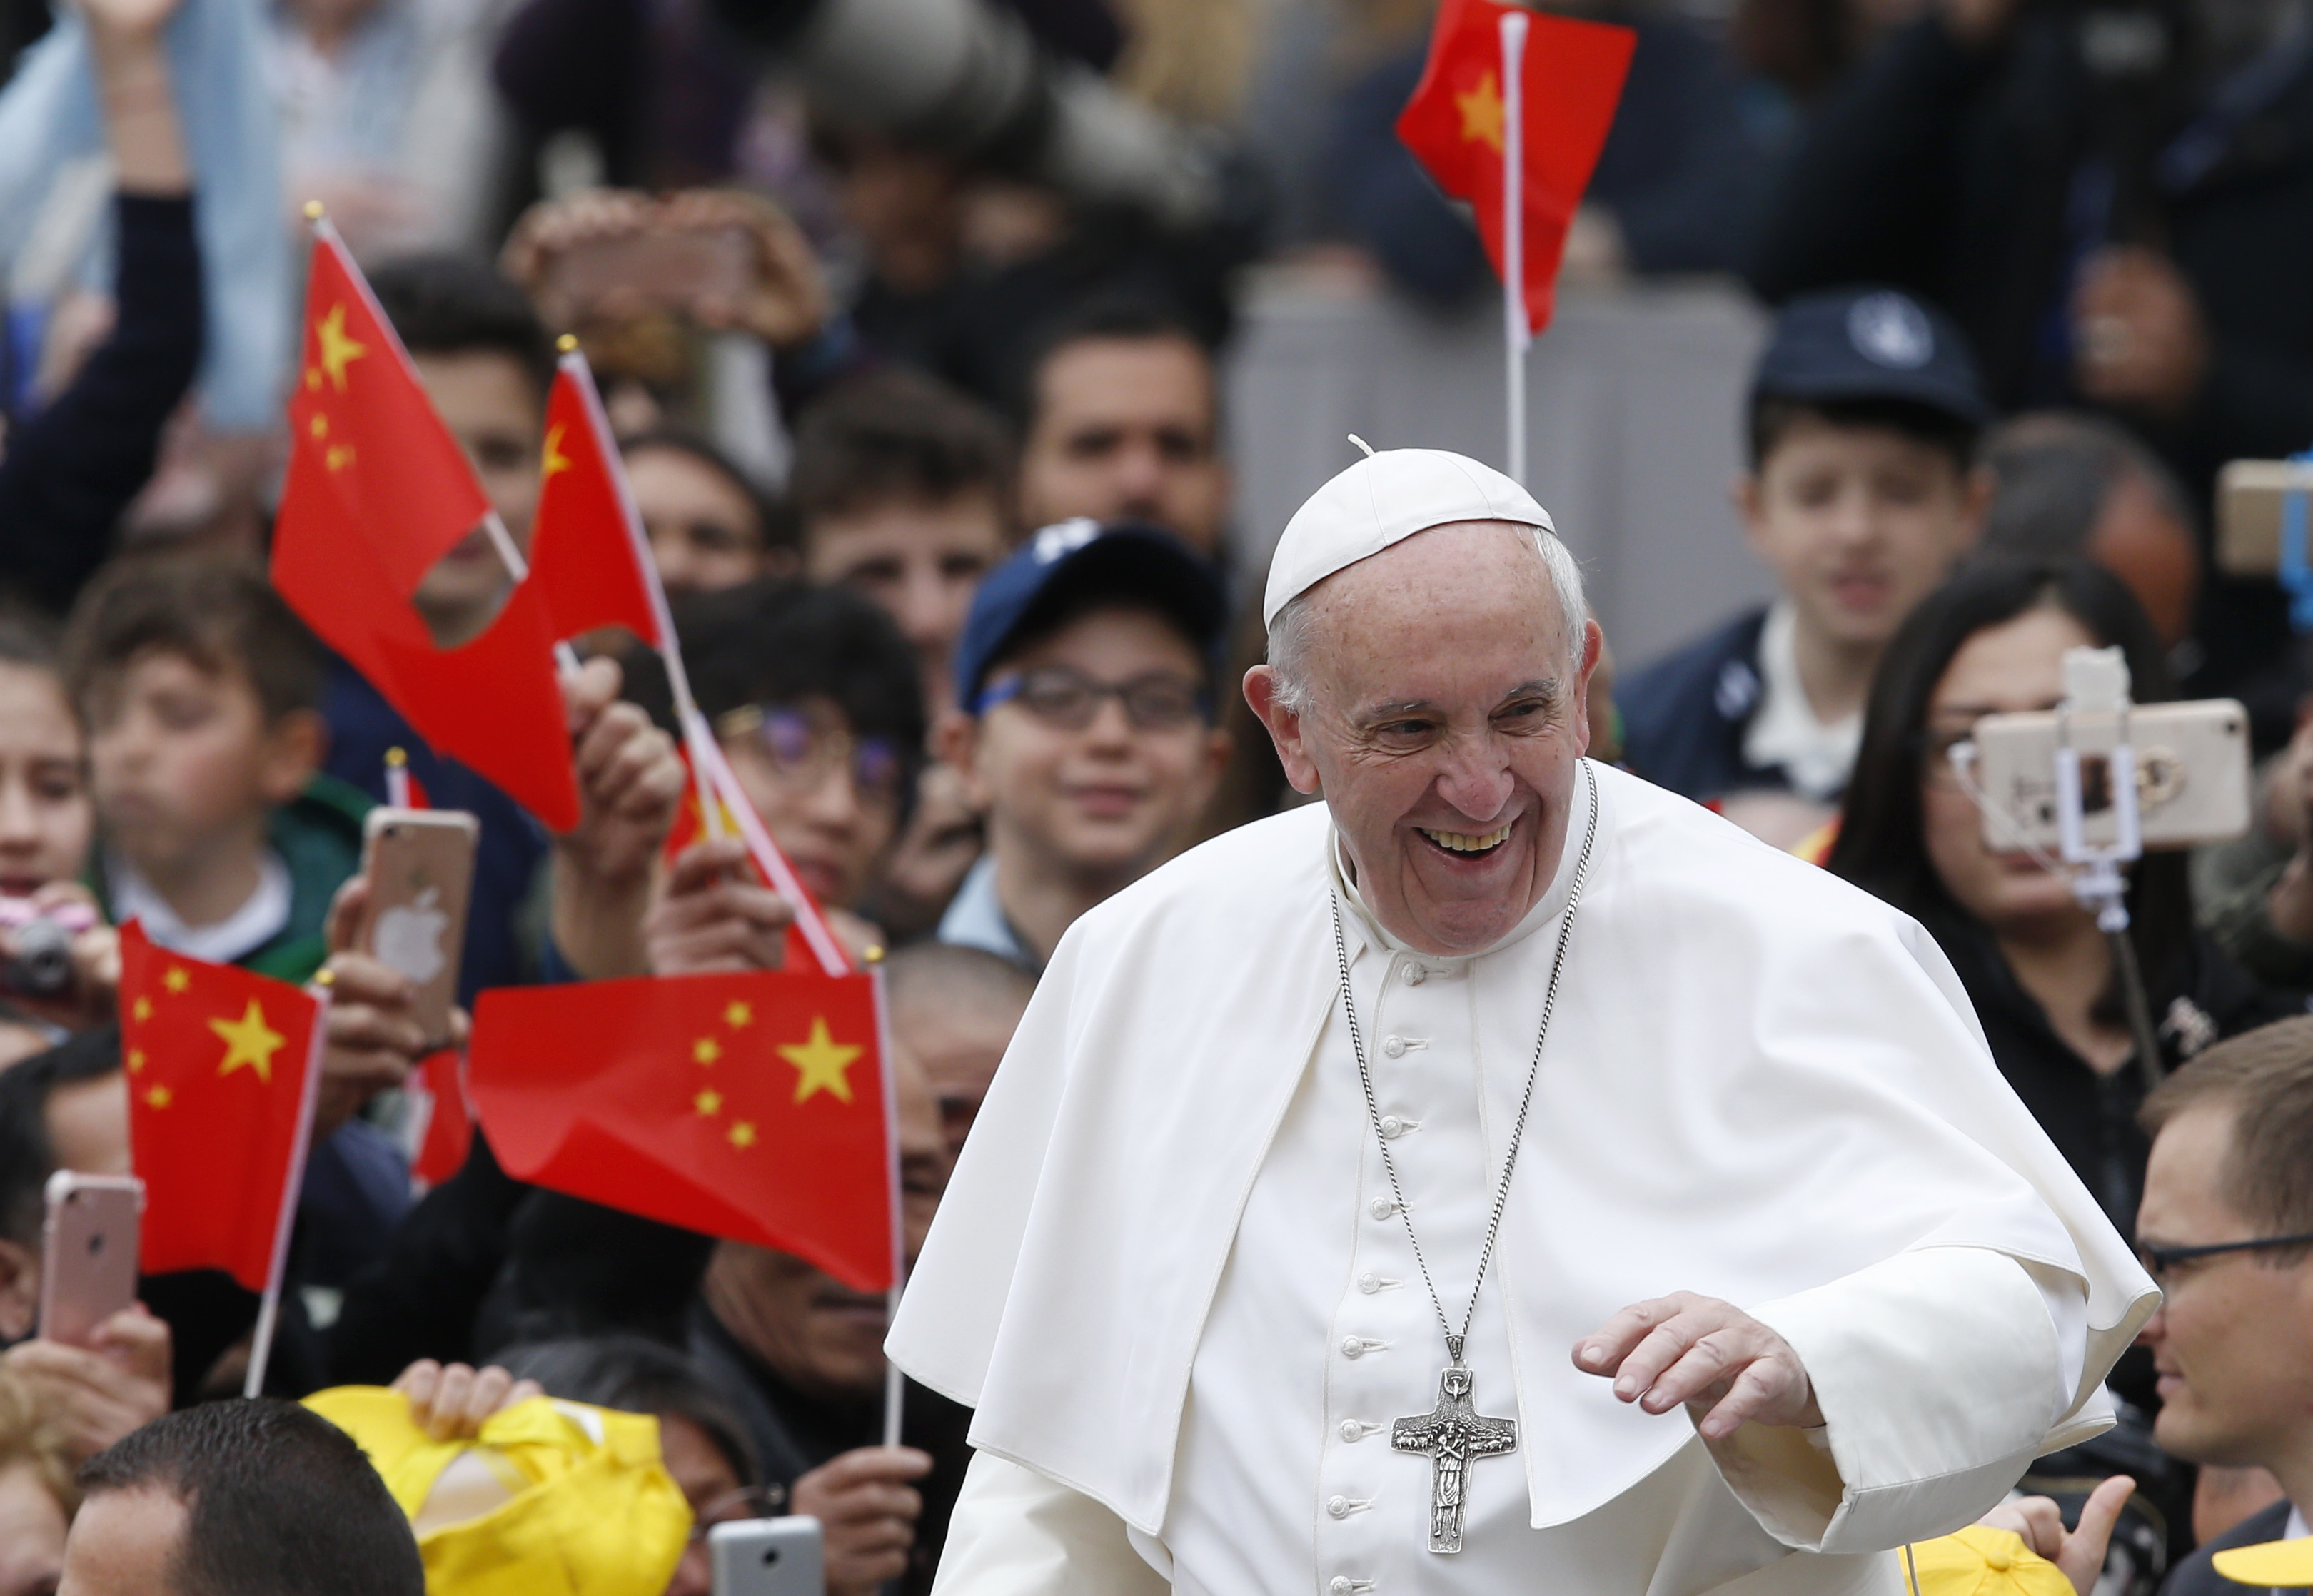 Chinese bishops to attend Vatican synod for first time